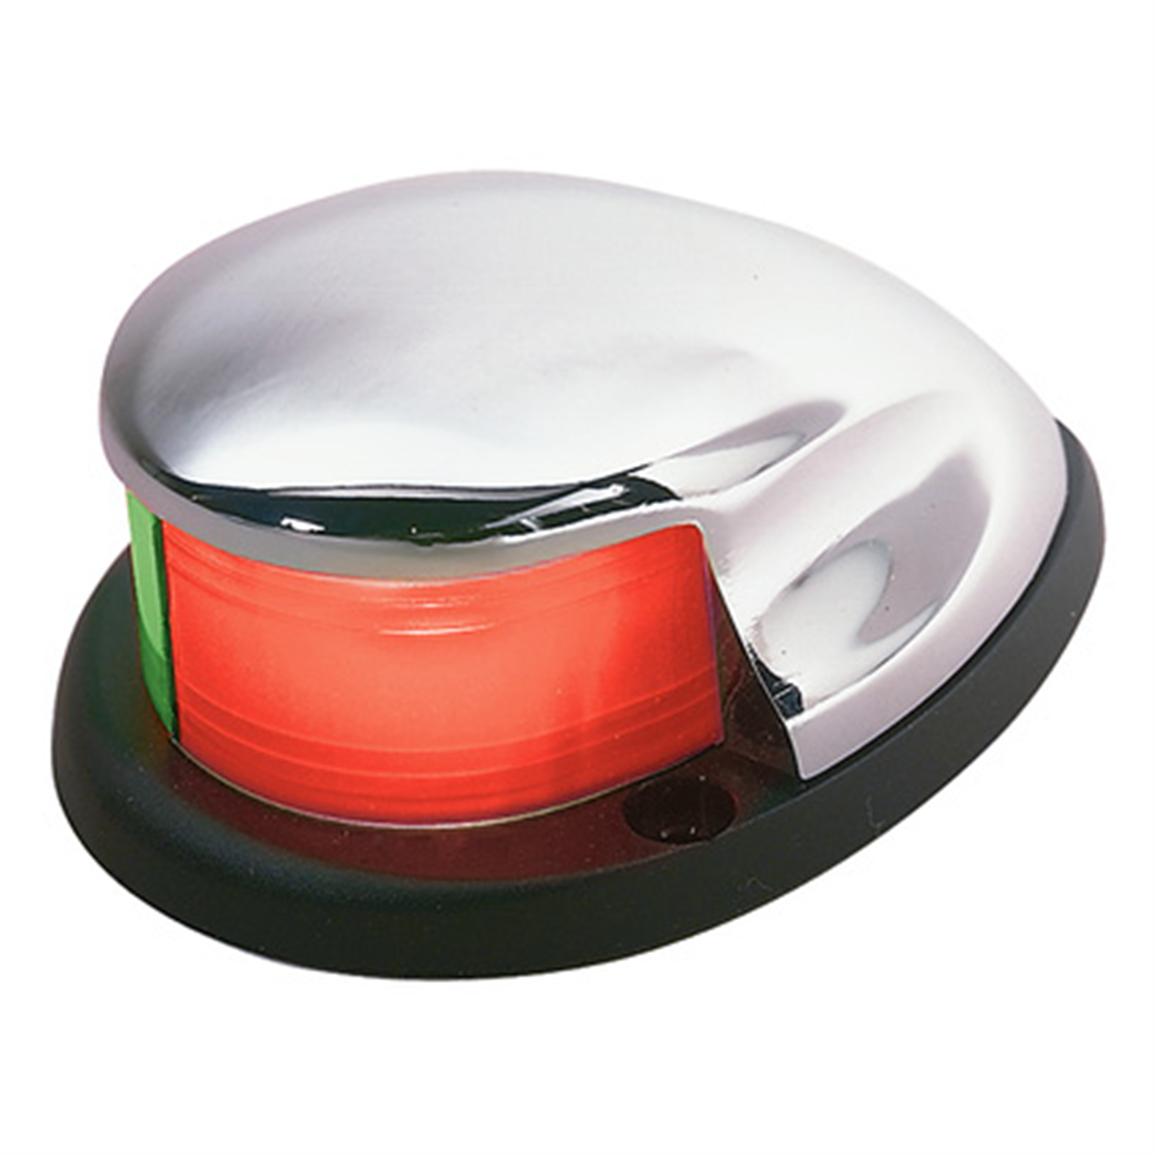 Seachoice Red &amp; Green Bow Light - 198741, Boat Lighting at ...